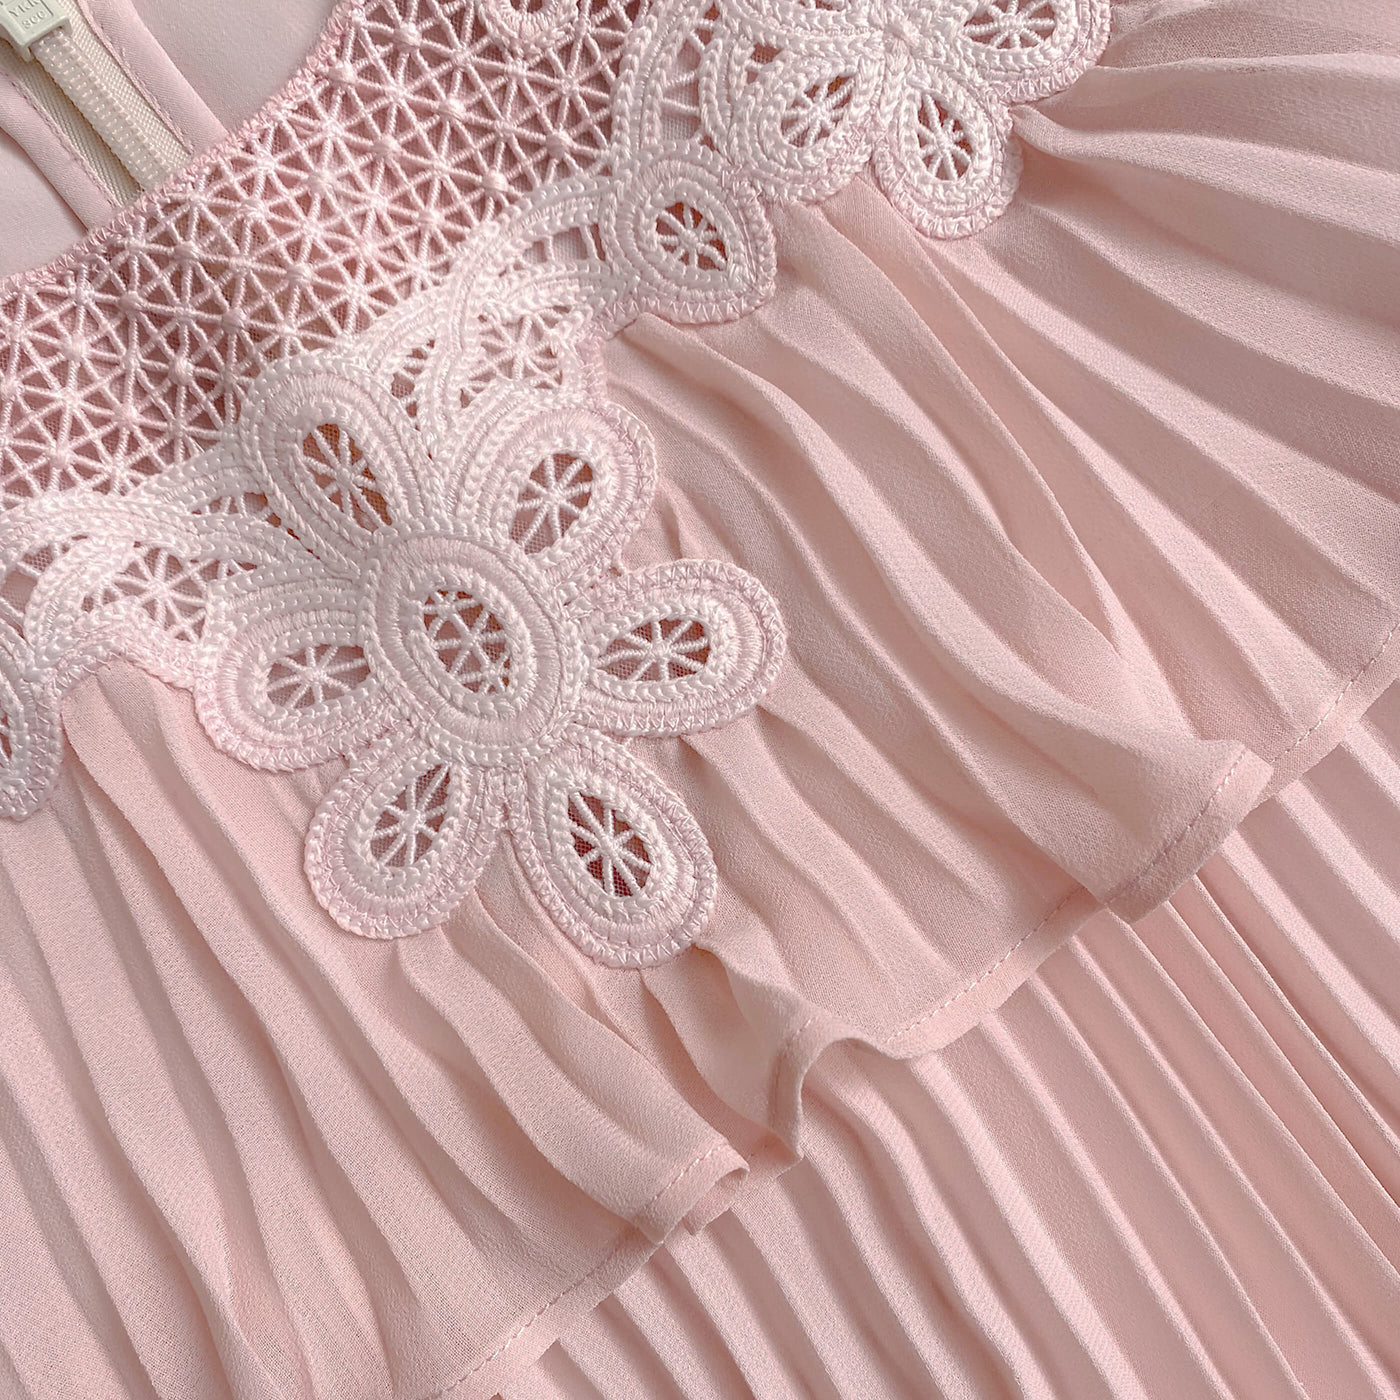 A close up of the fabric for the Pink Tiered Chiffon Dress